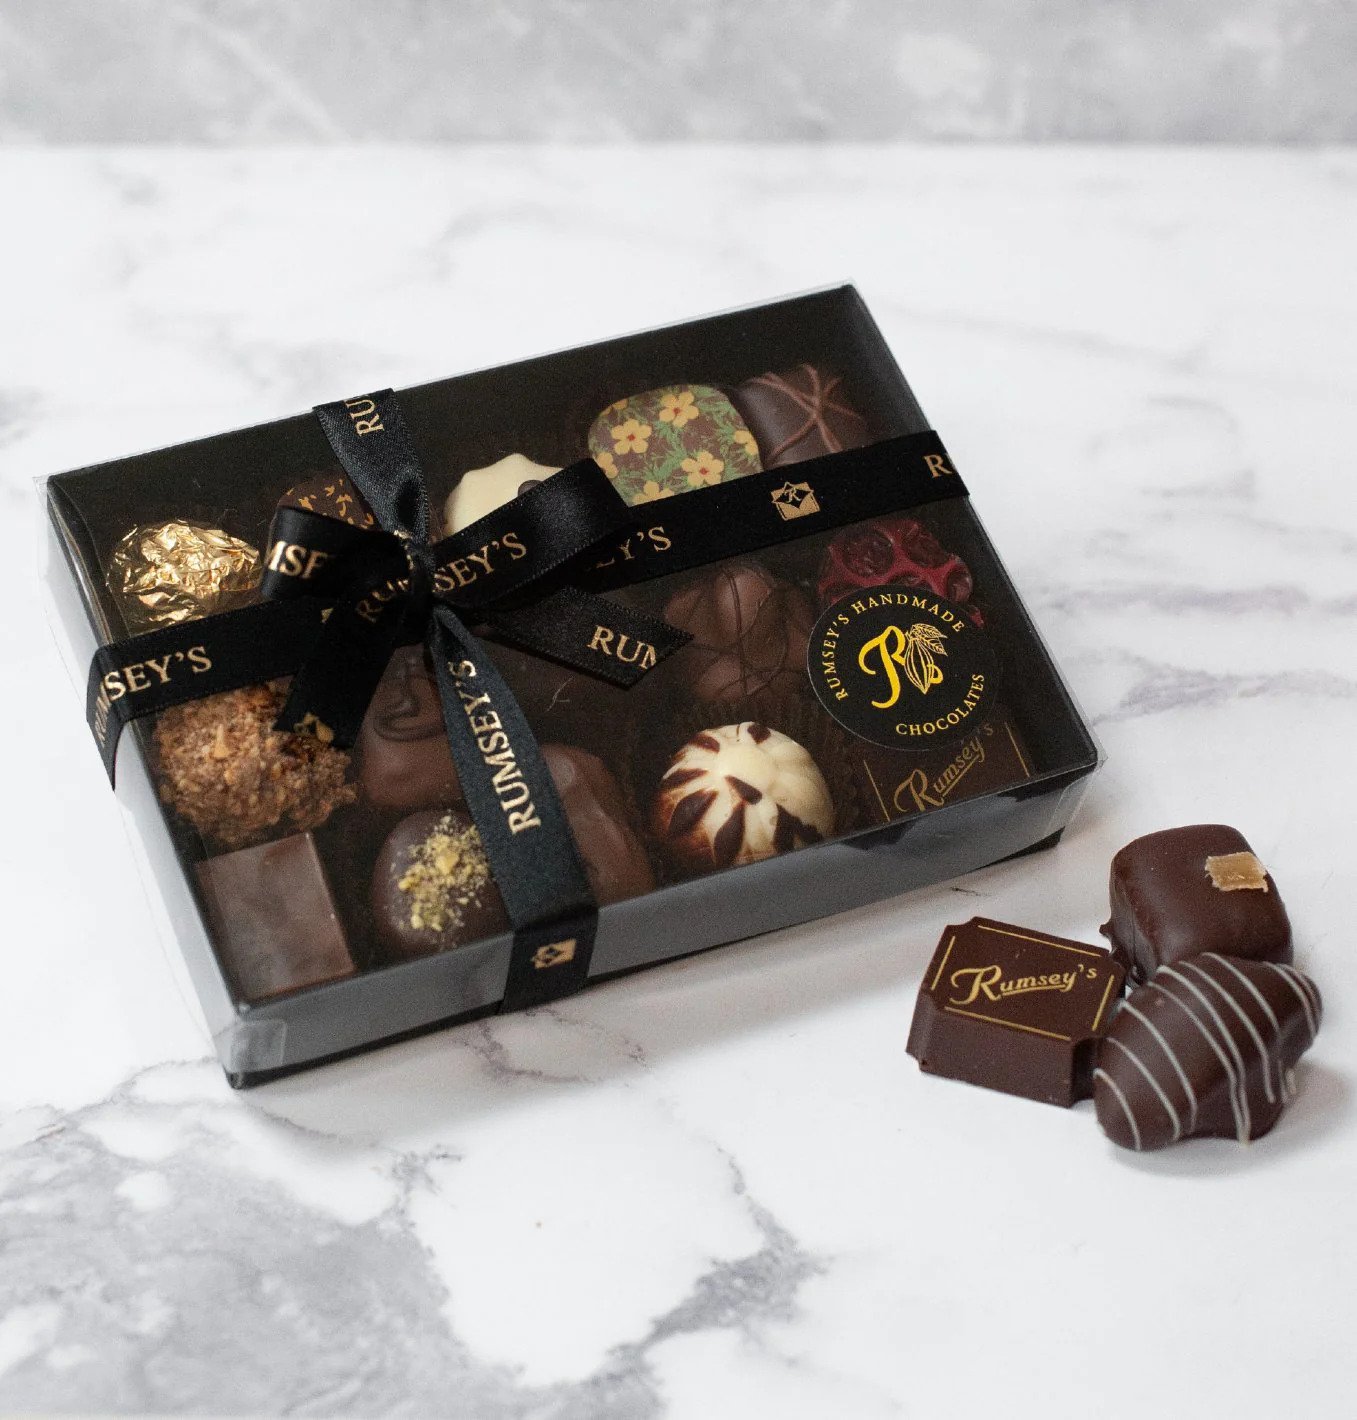 Rumsey's chocolates